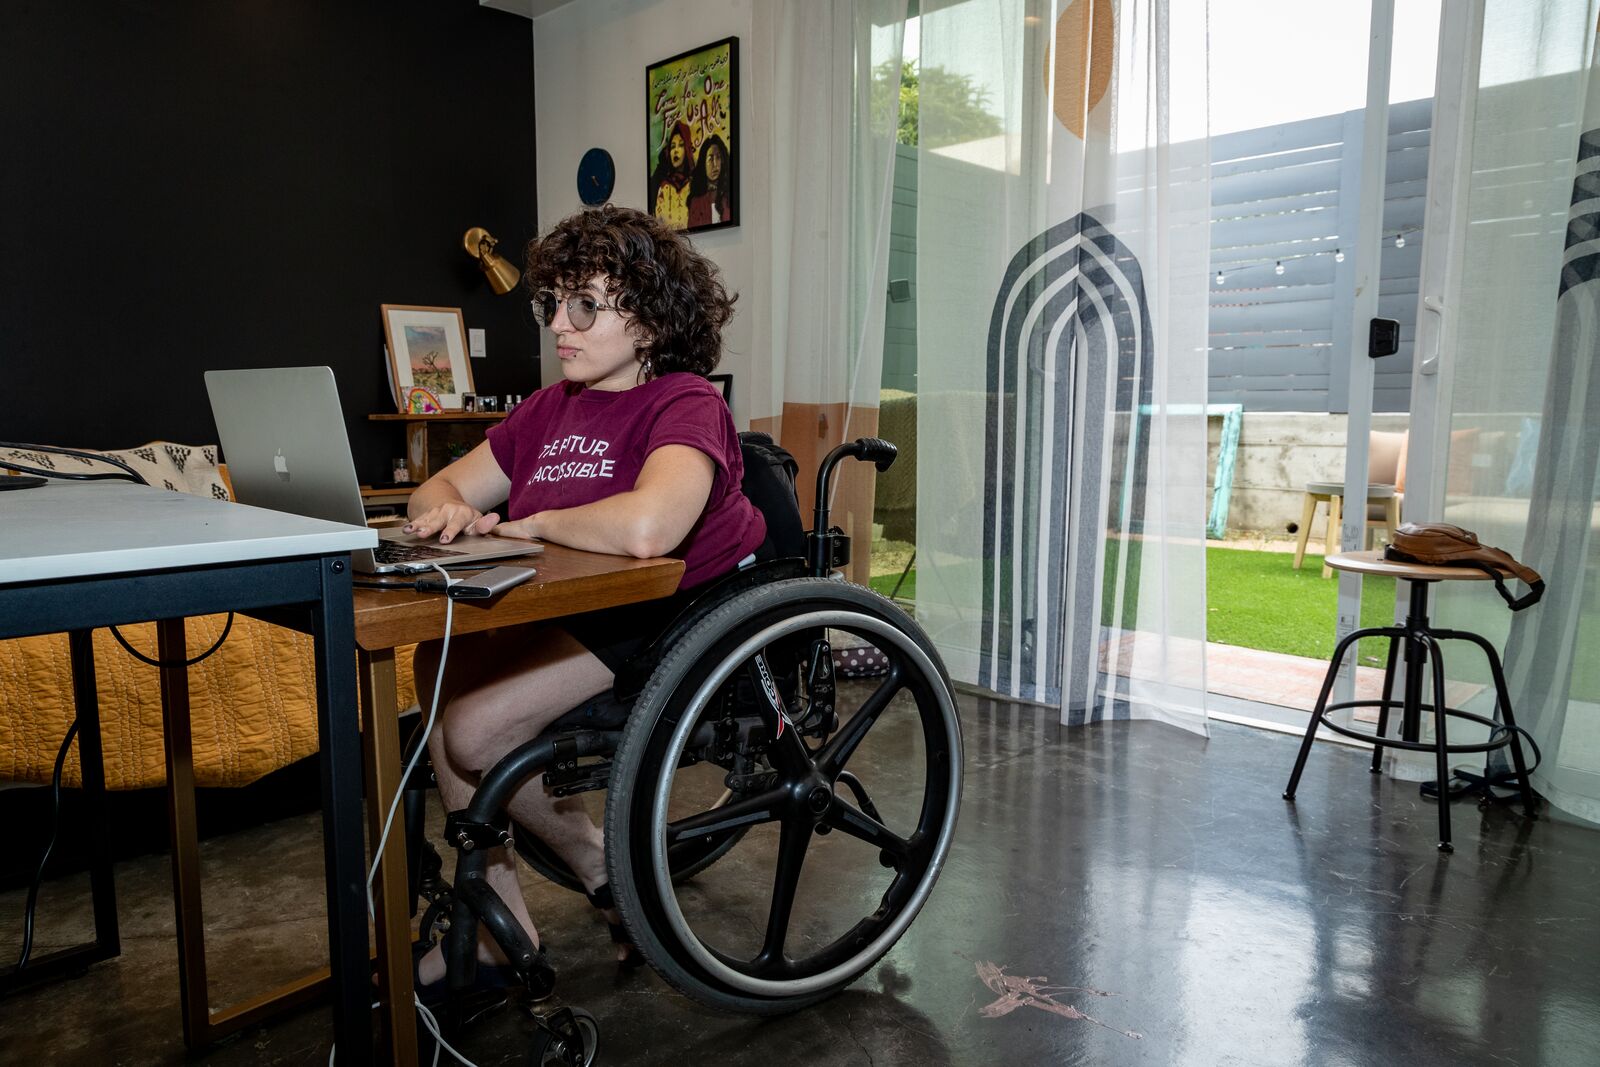 A person in their twenties or thirties, who's in a wheelchair, works on their laptop at a desk in their apartment.